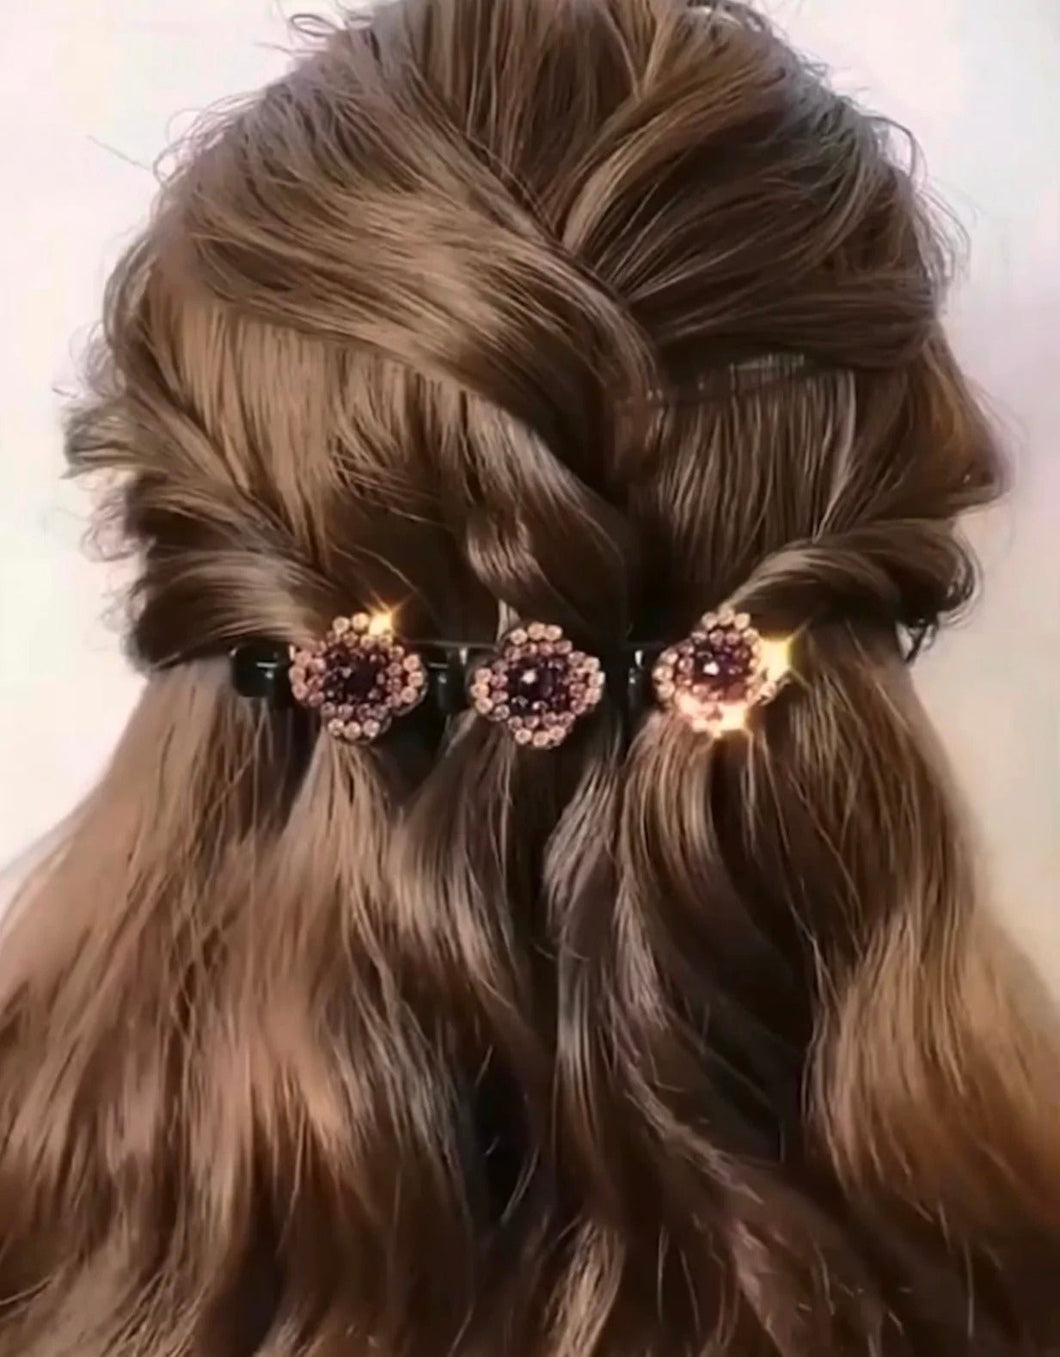 Put a Little Bling in Your Hair!! - WESTERN STYLIN'